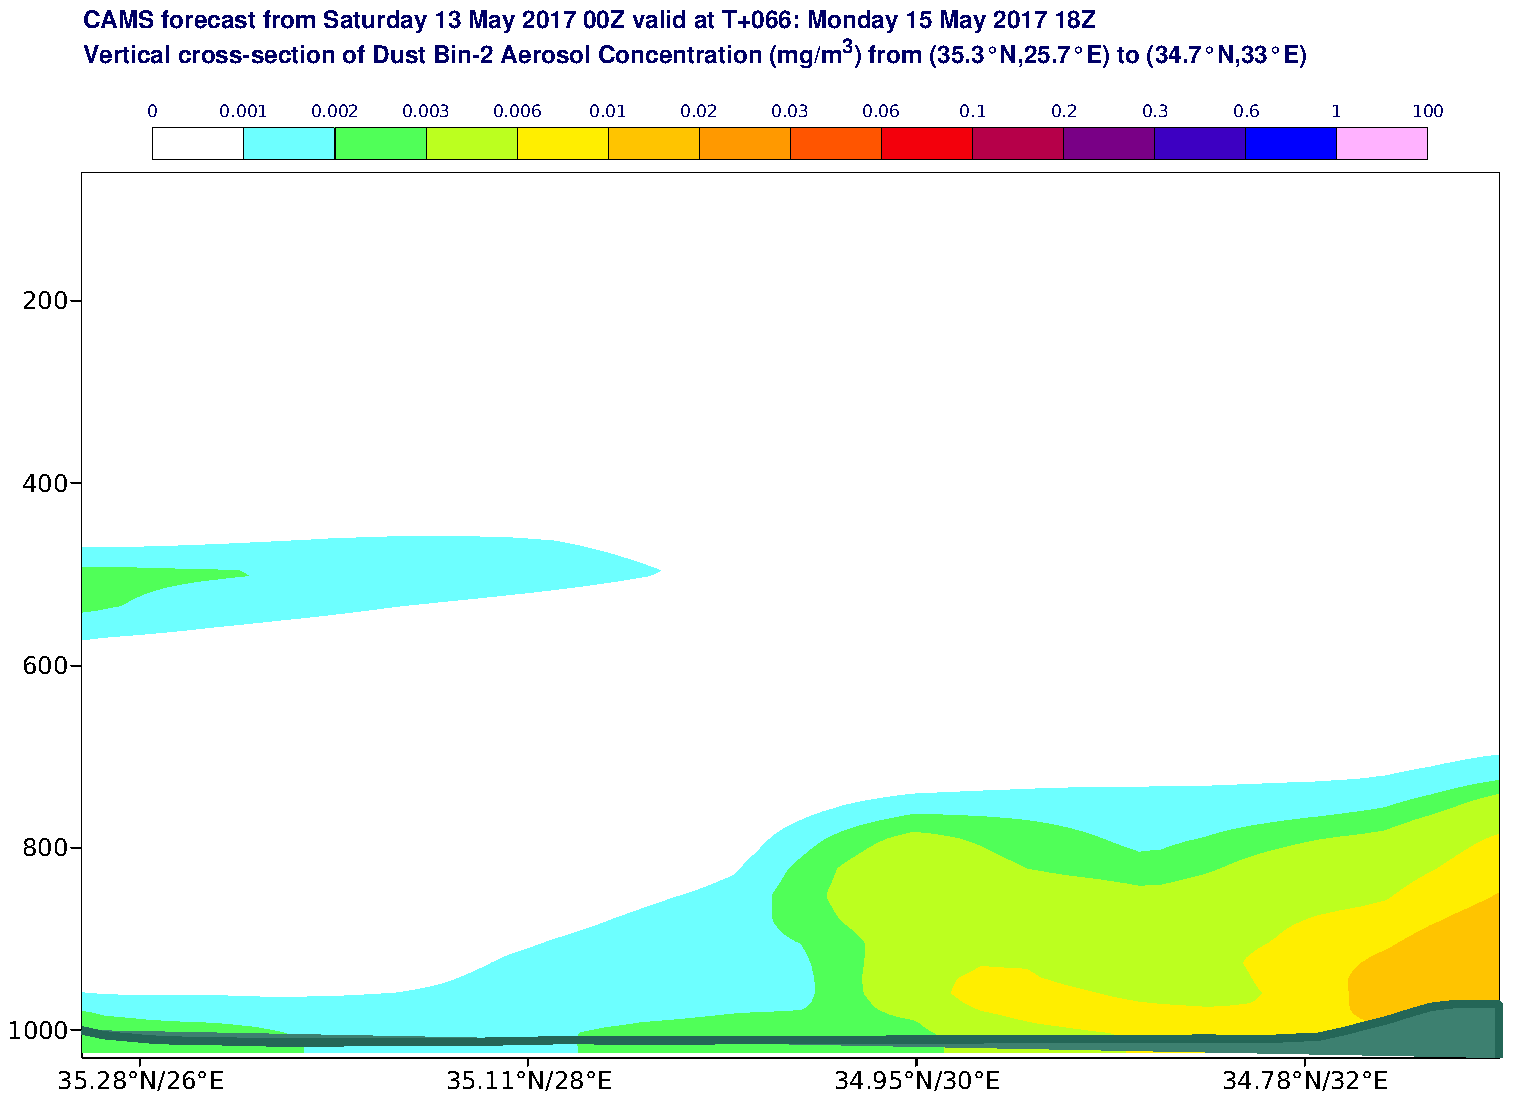 Vertical cross-section of Dust Bin-2 Aerosol Concentration (mg/m3) valid at T66 - 2017-05-15 18:00